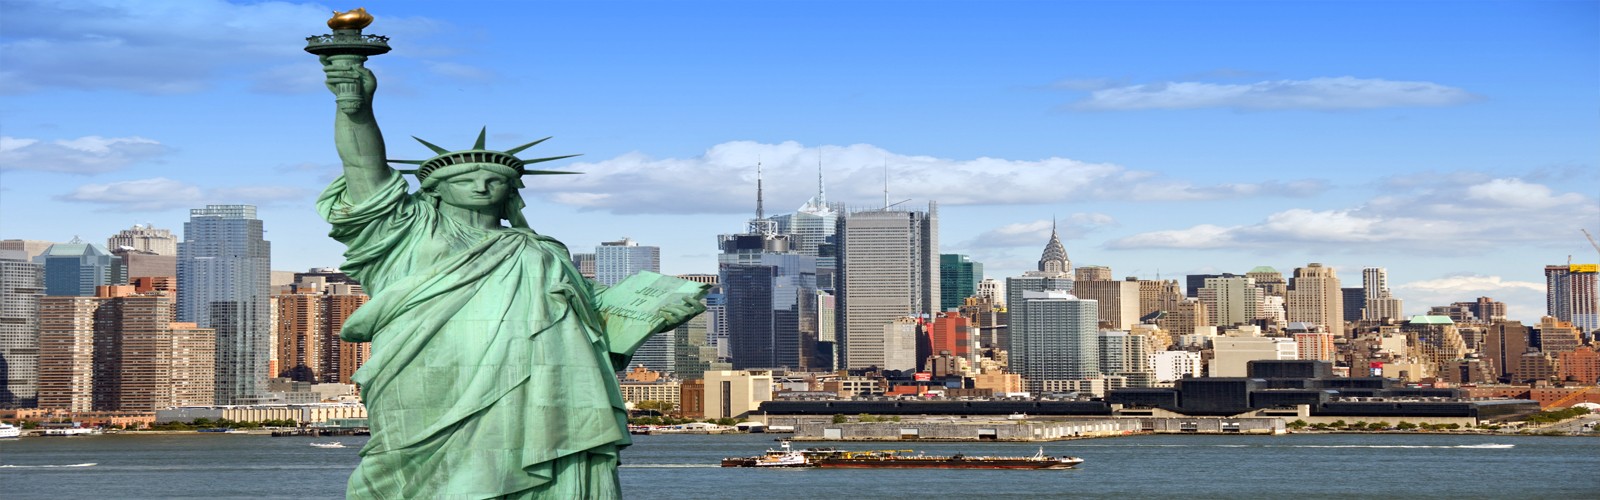 things to do in new york - blog - header